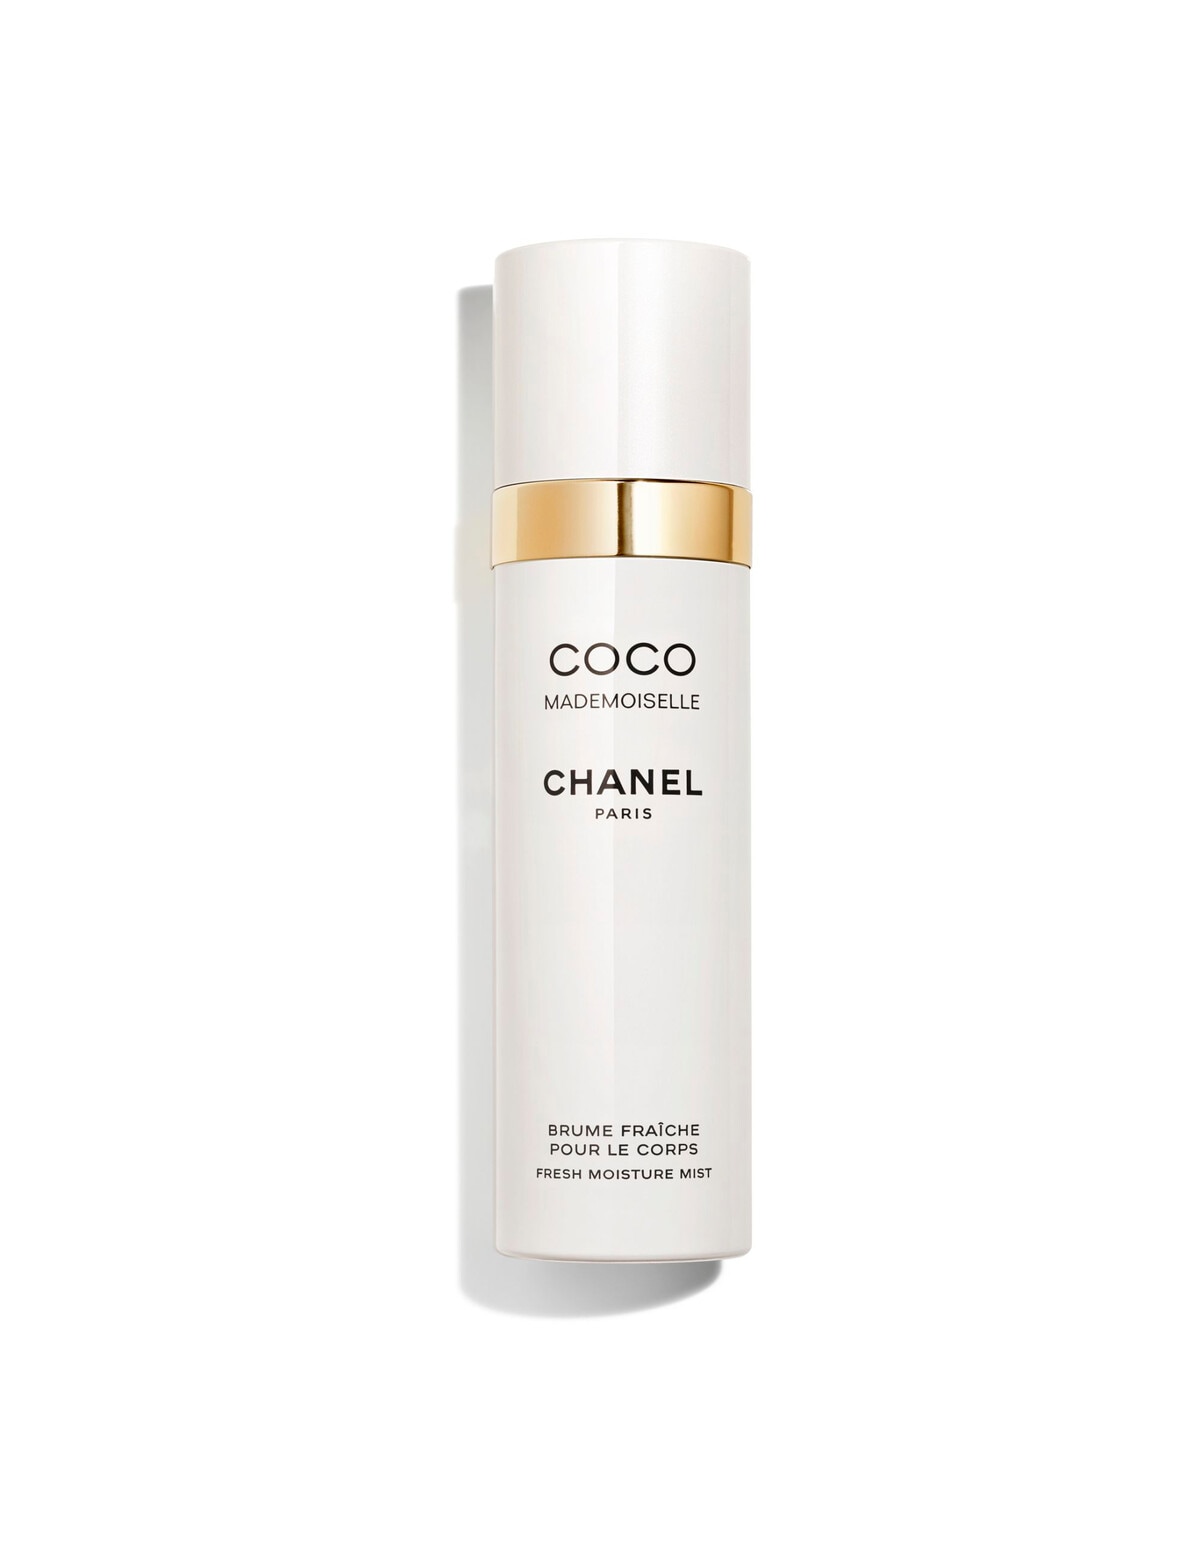 Lippy in London : Chanel Coco Mademoiselle Hair Mist Review